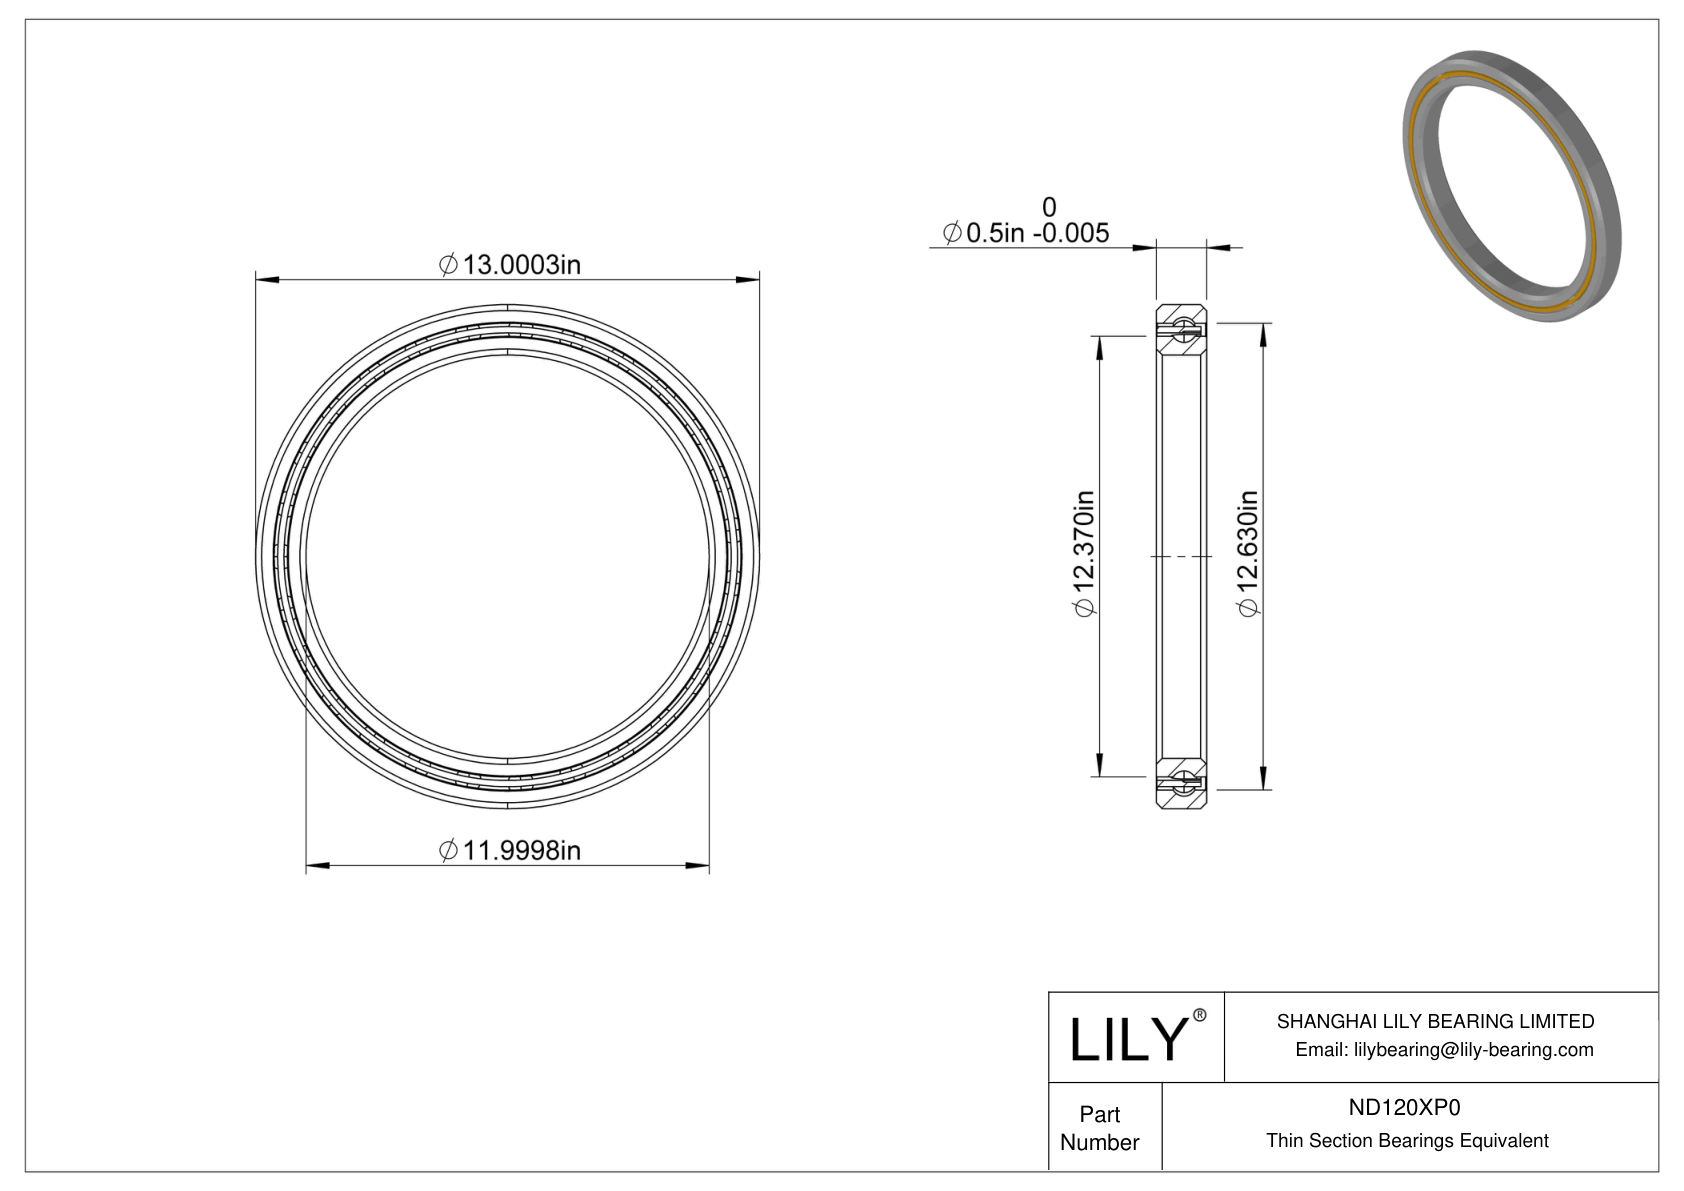 ND120XP0 Constant Section (CS) Bearings cad drawing